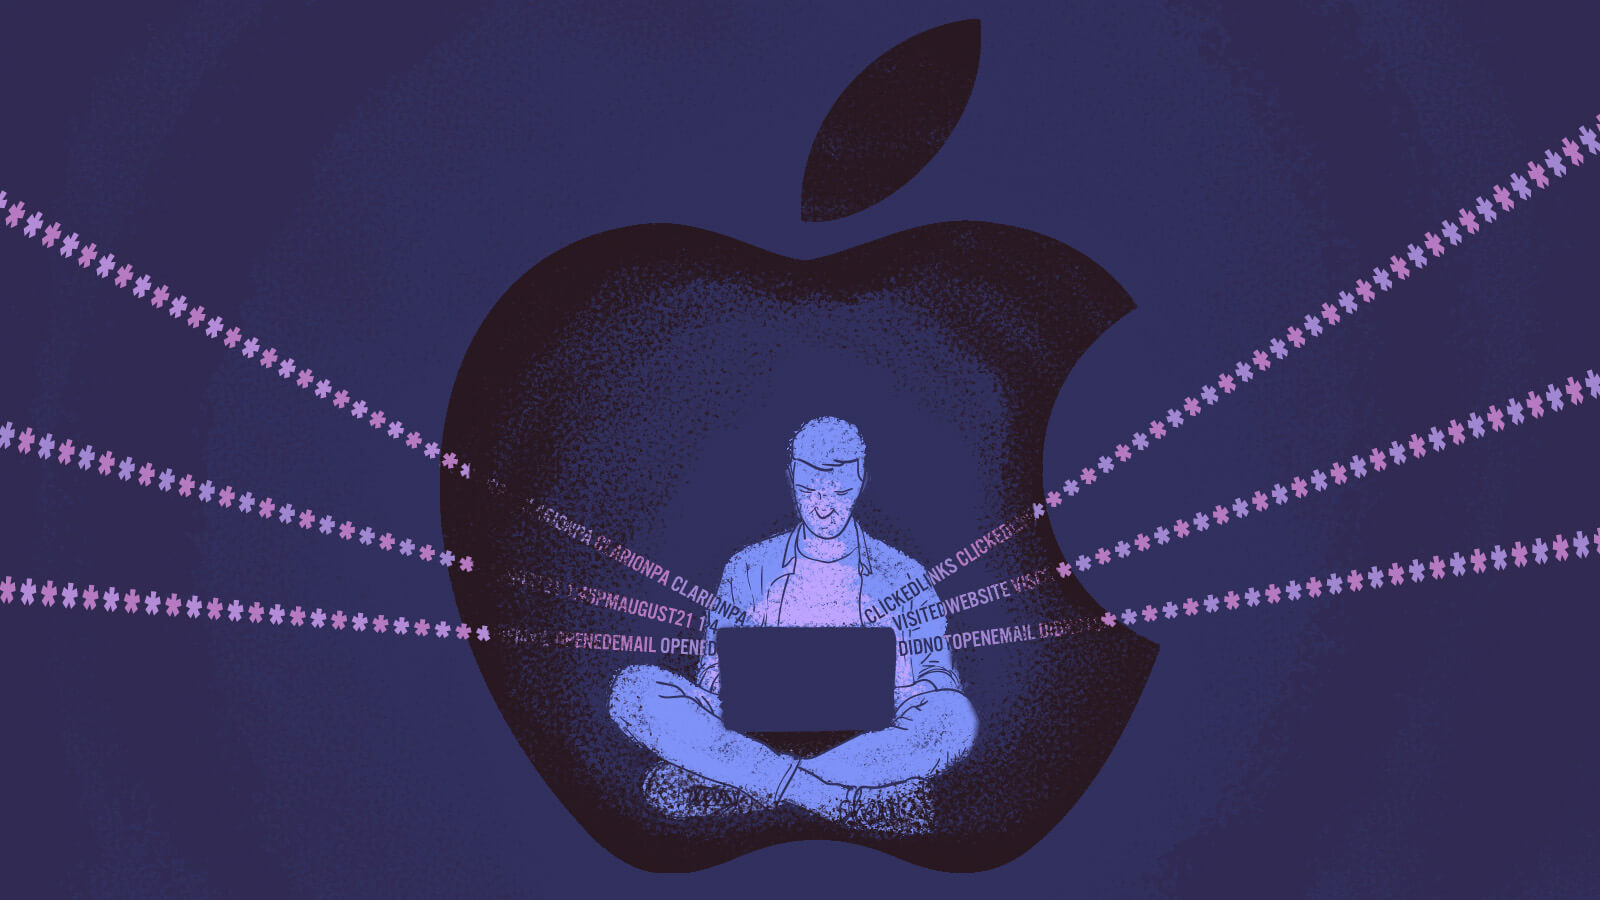 Illustration of person on laptop inside an Apple logo bubble.